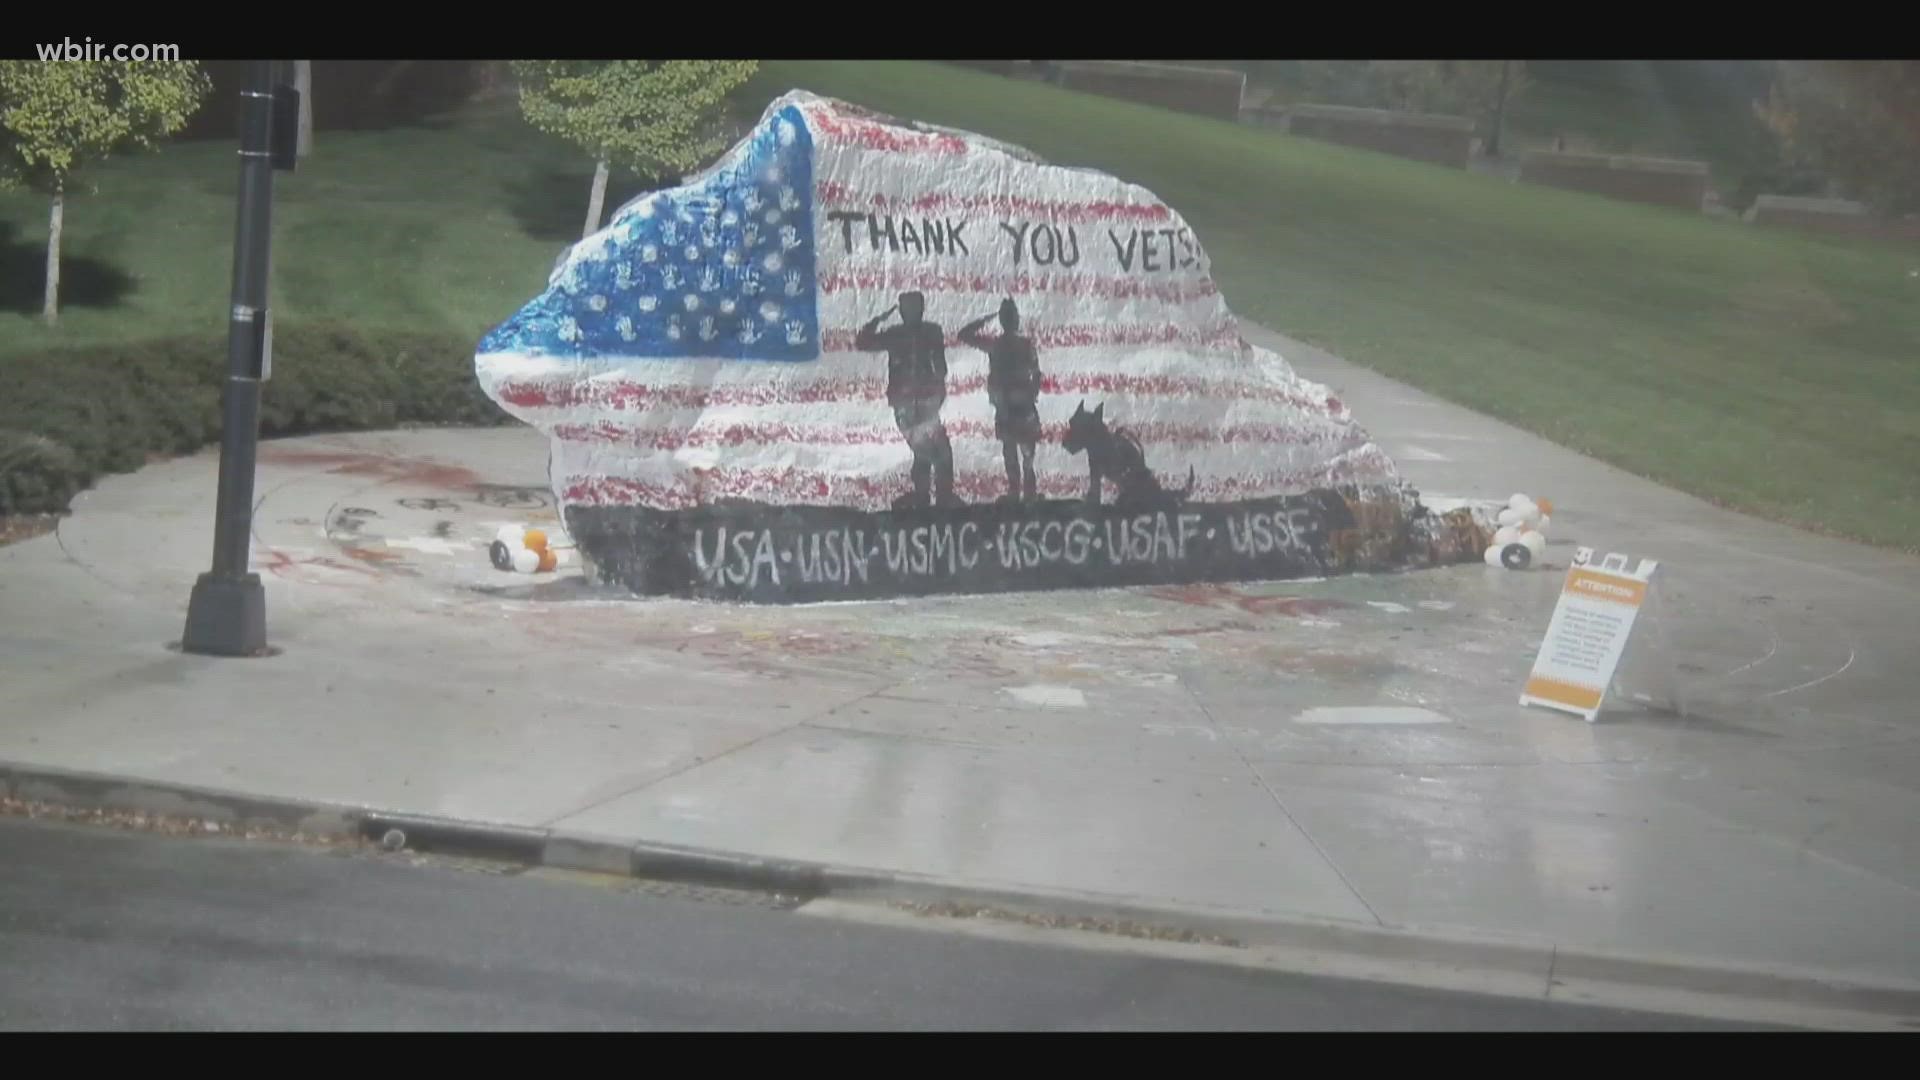 Several University of Tennessee's student organizations and groups are honoring veterans by painting The Rock.